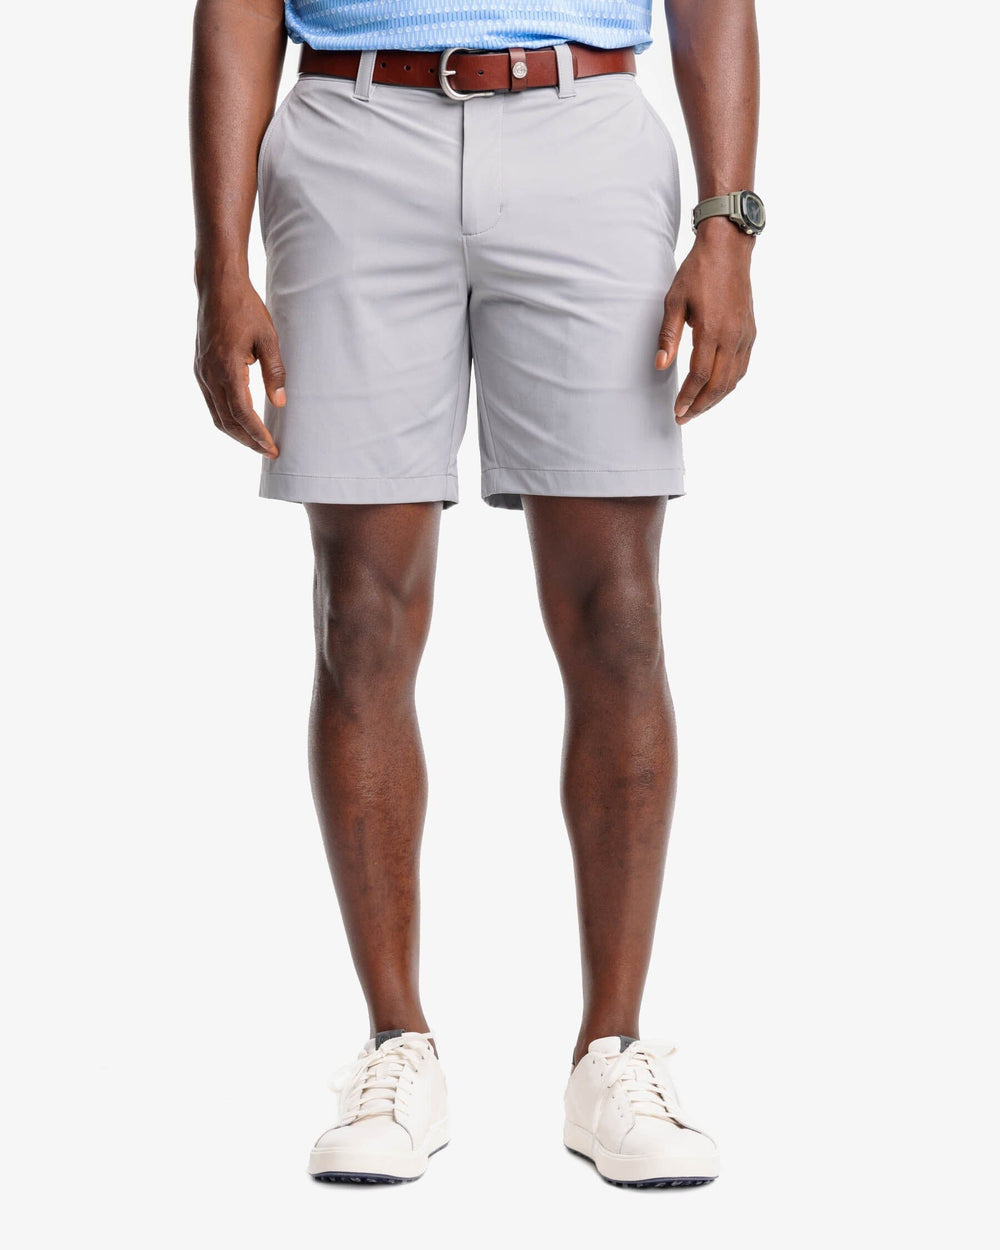 The front view of the Southern Tide brrr die performance short 1 by Southern Tide - Steel Grey